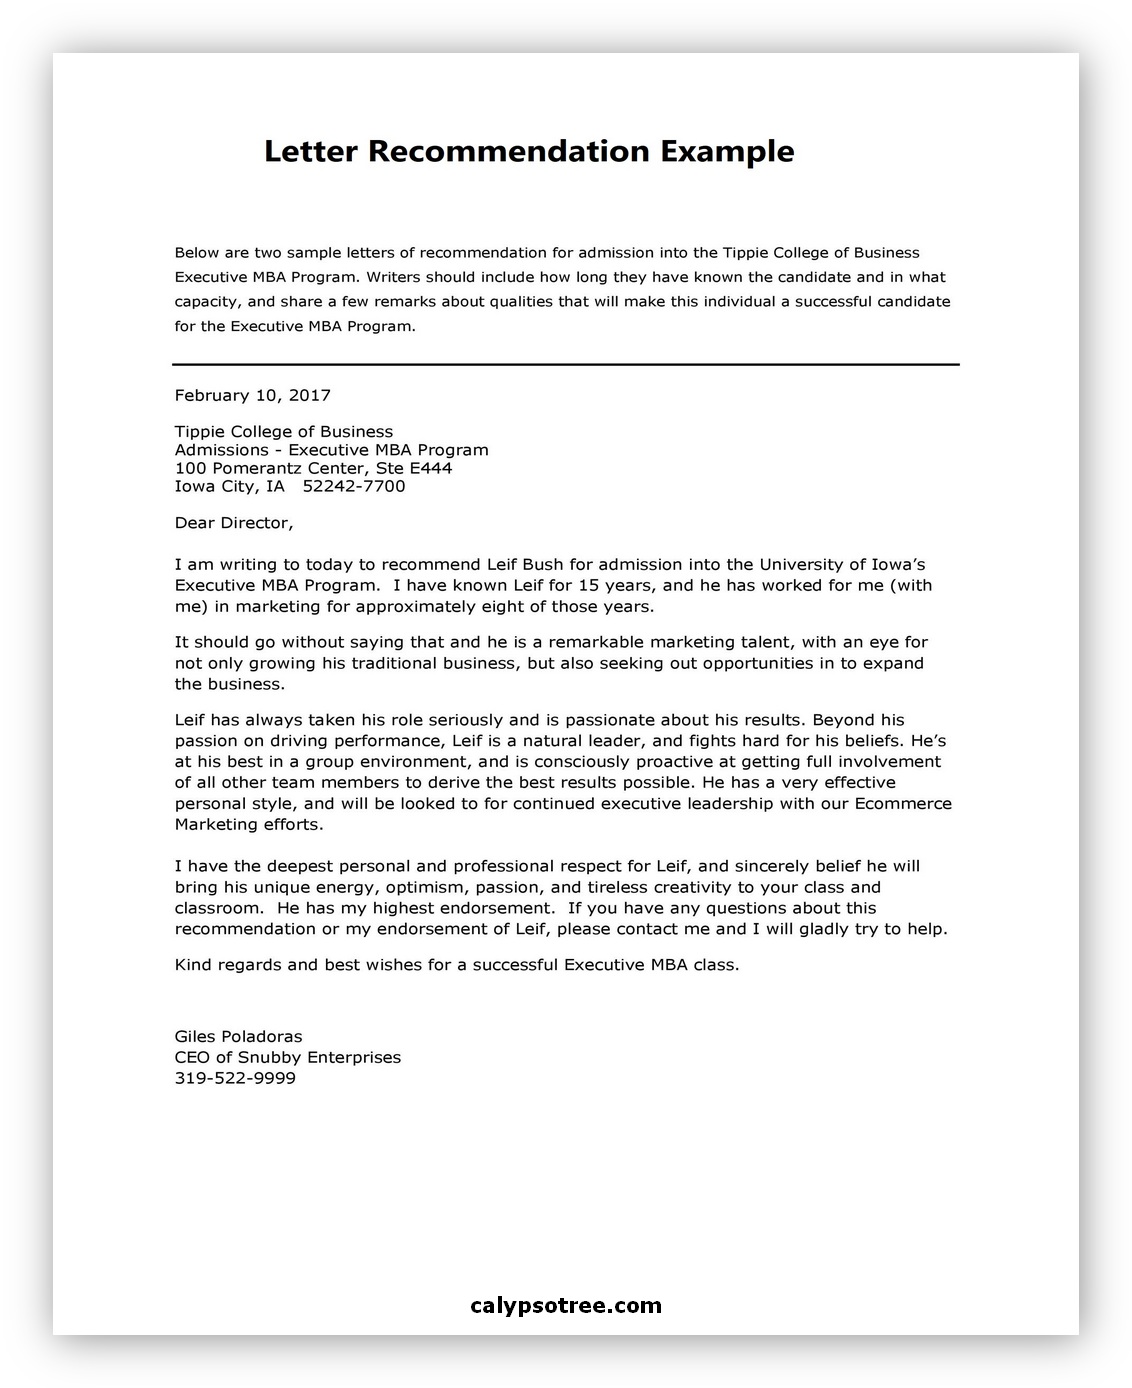 Letter Recommendation Example 04